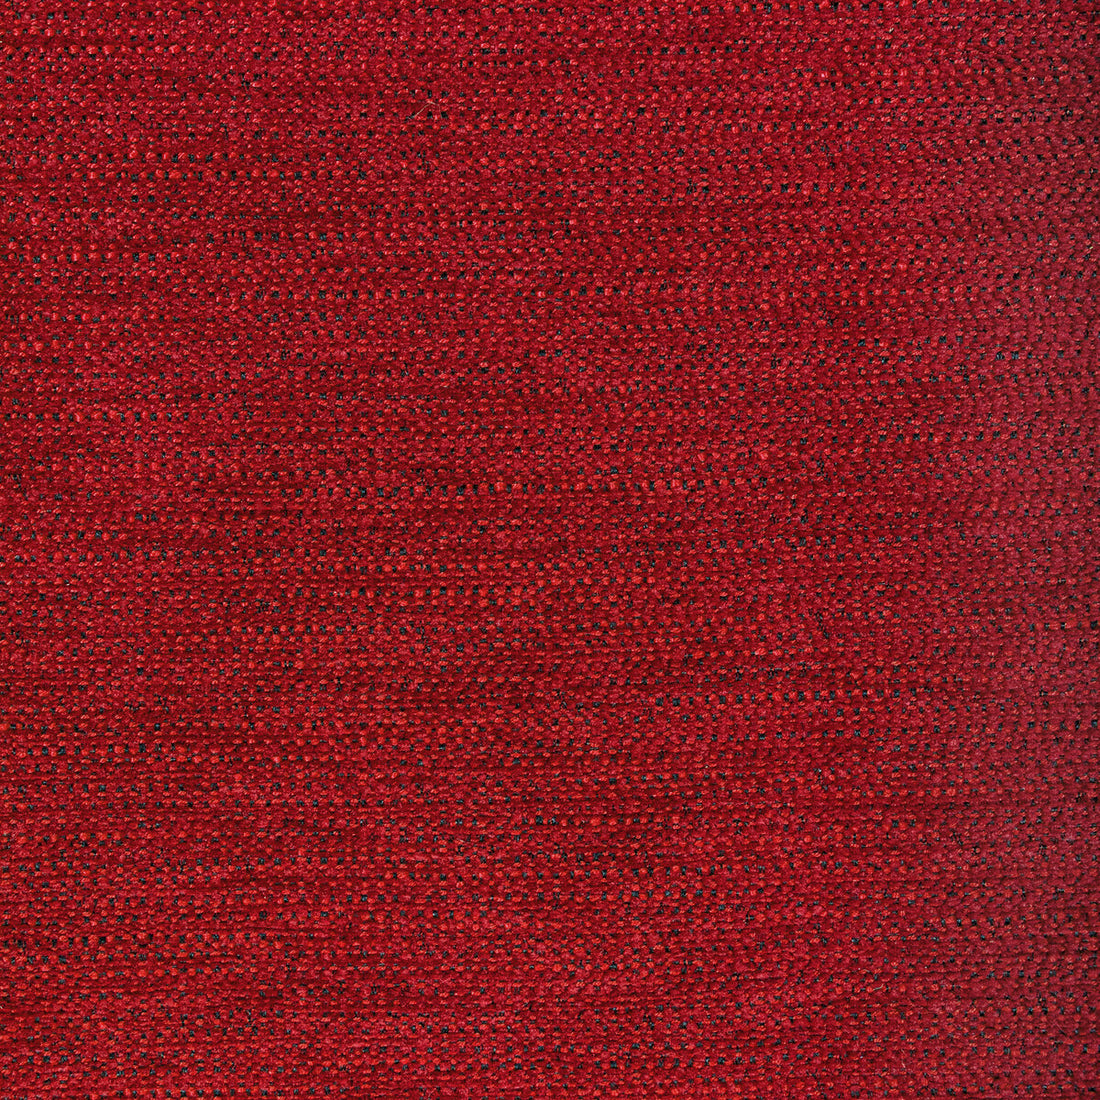 Recoup fabric in caliente color - pattern 36569.19.0 - by Kravet Contract in the Seaqual collection